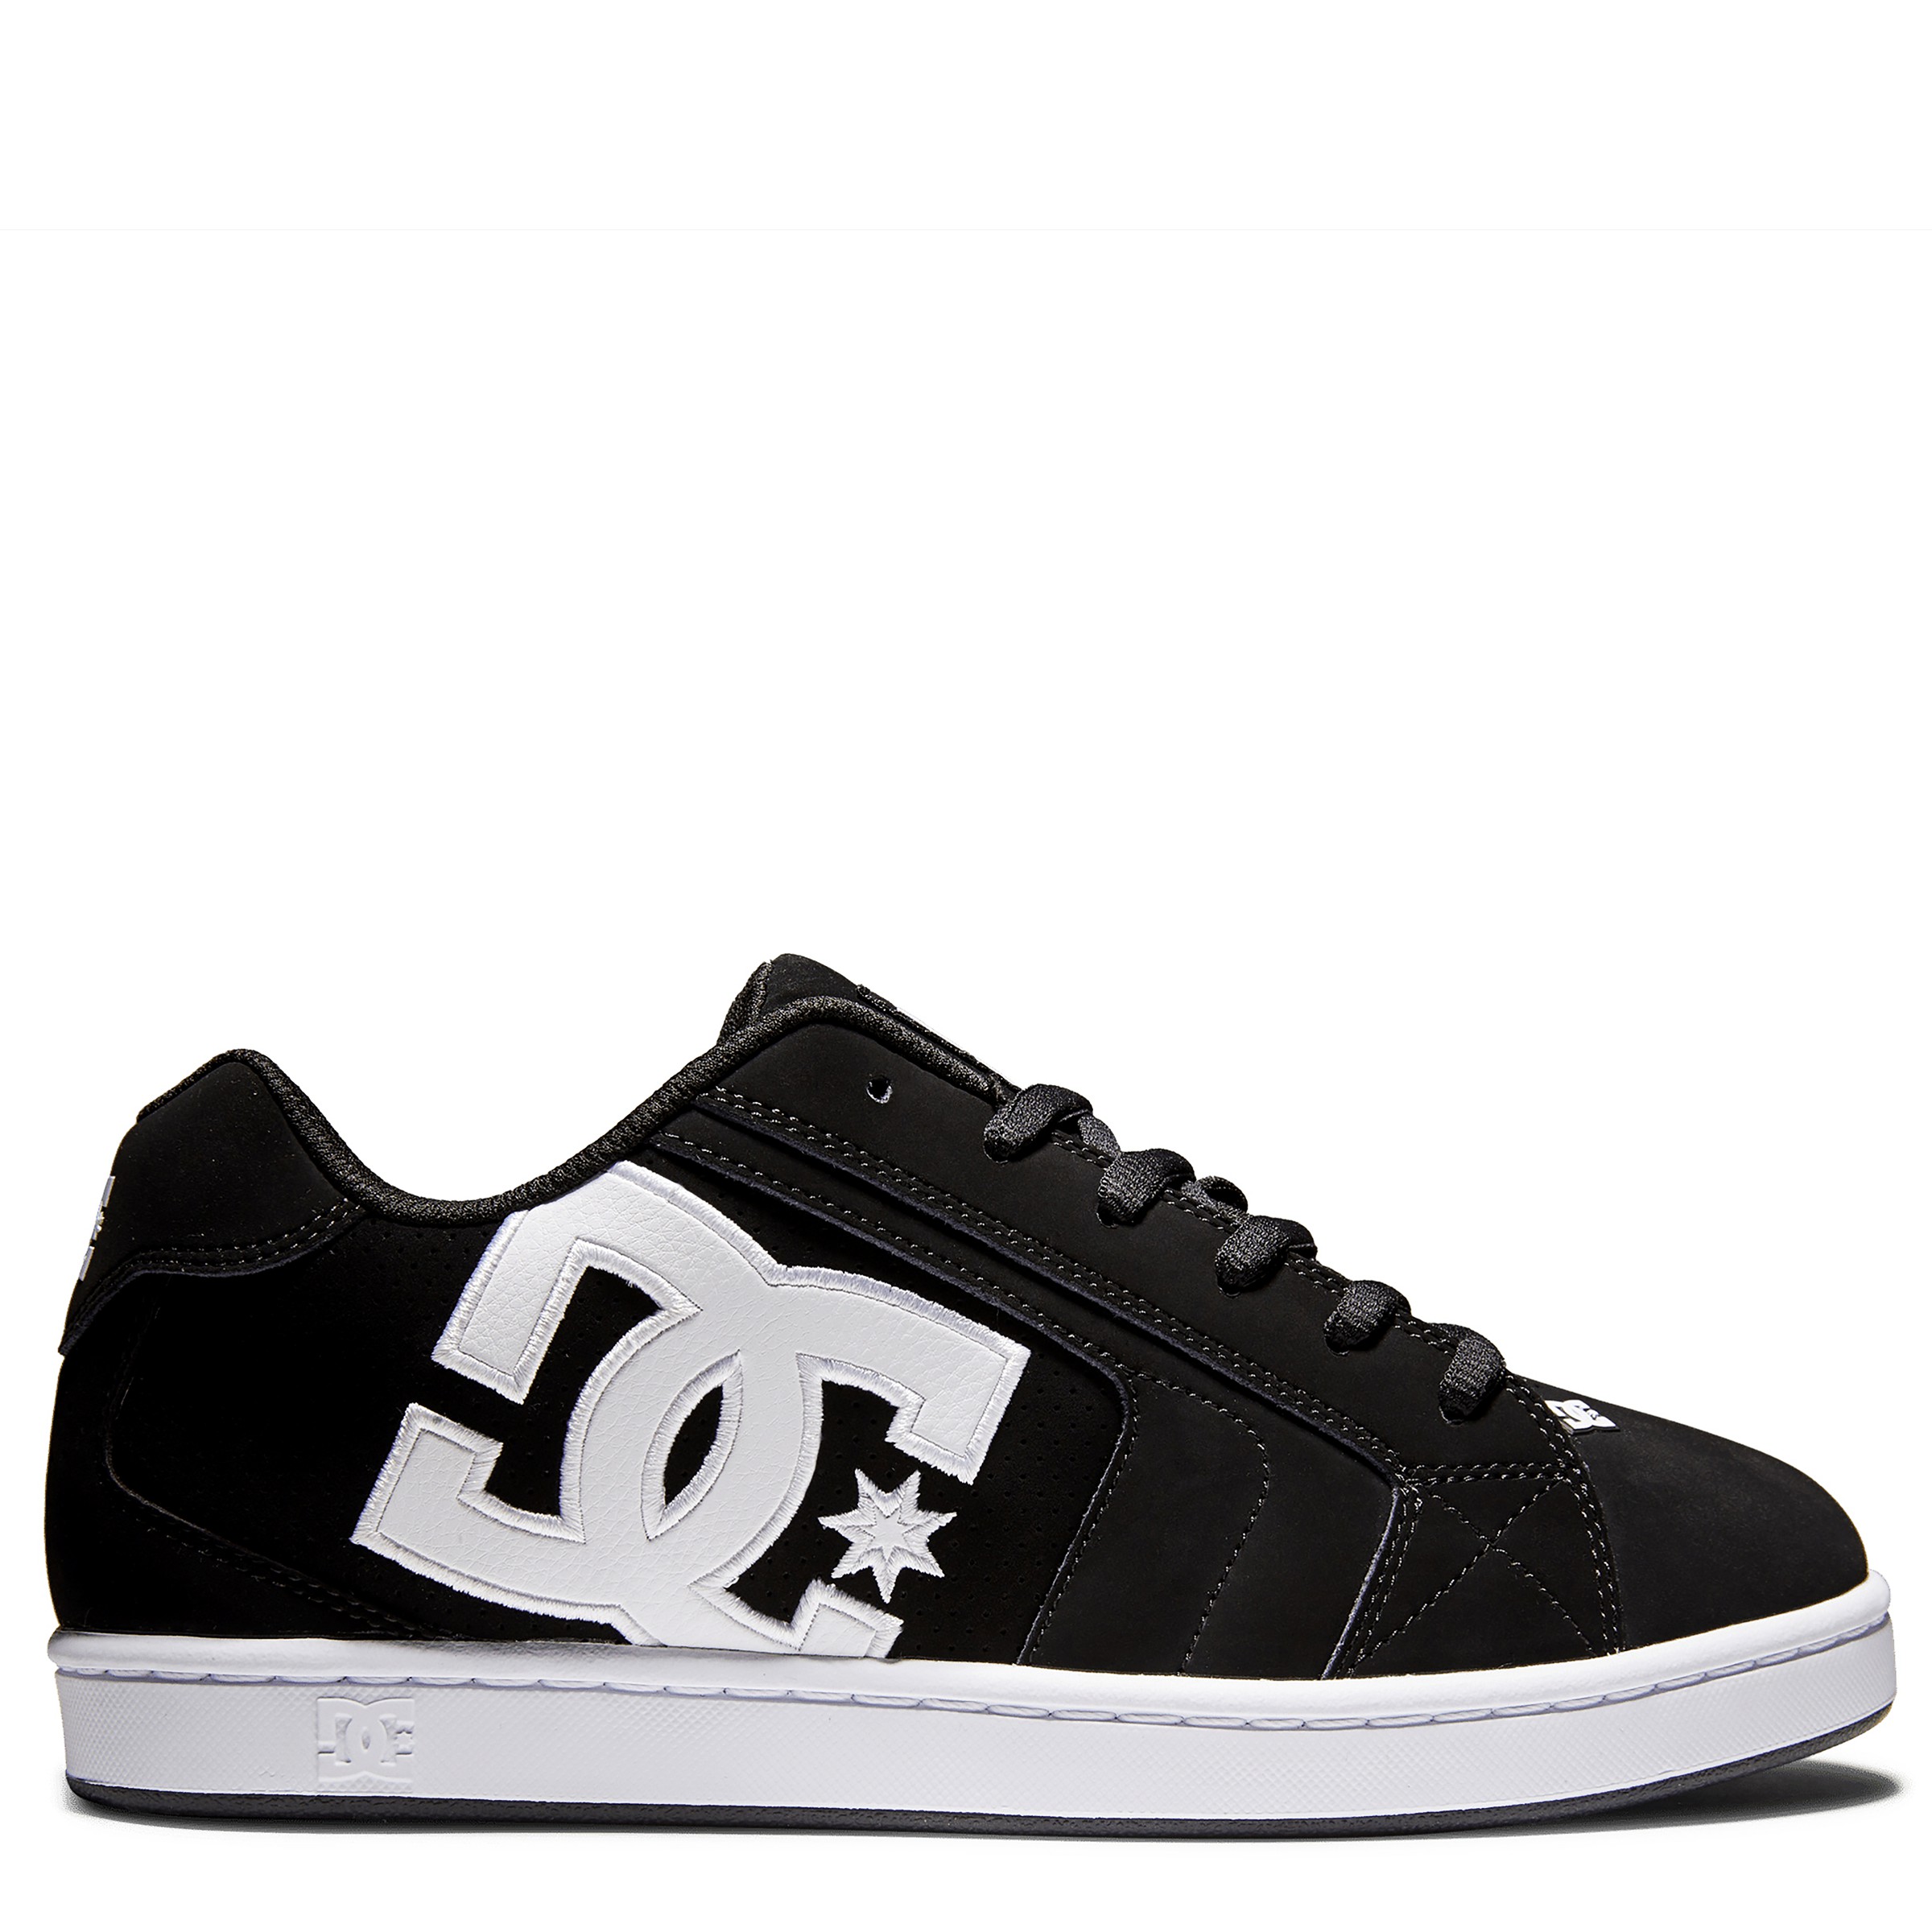 DC Net SE Trainers in Black Resin 